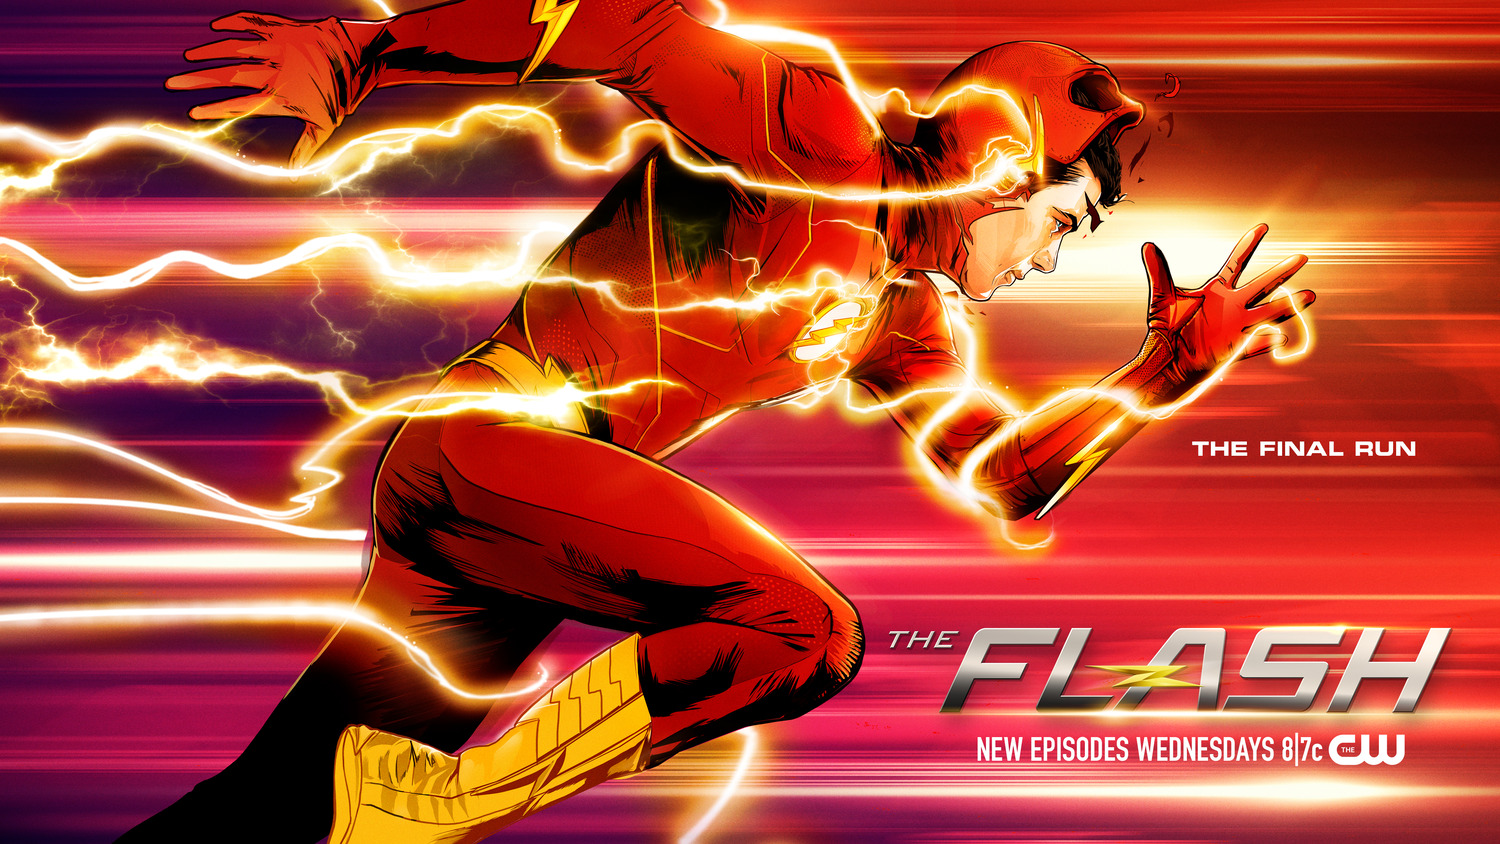 Extra Large TV Poster Image for The Flash (#62 of 65)